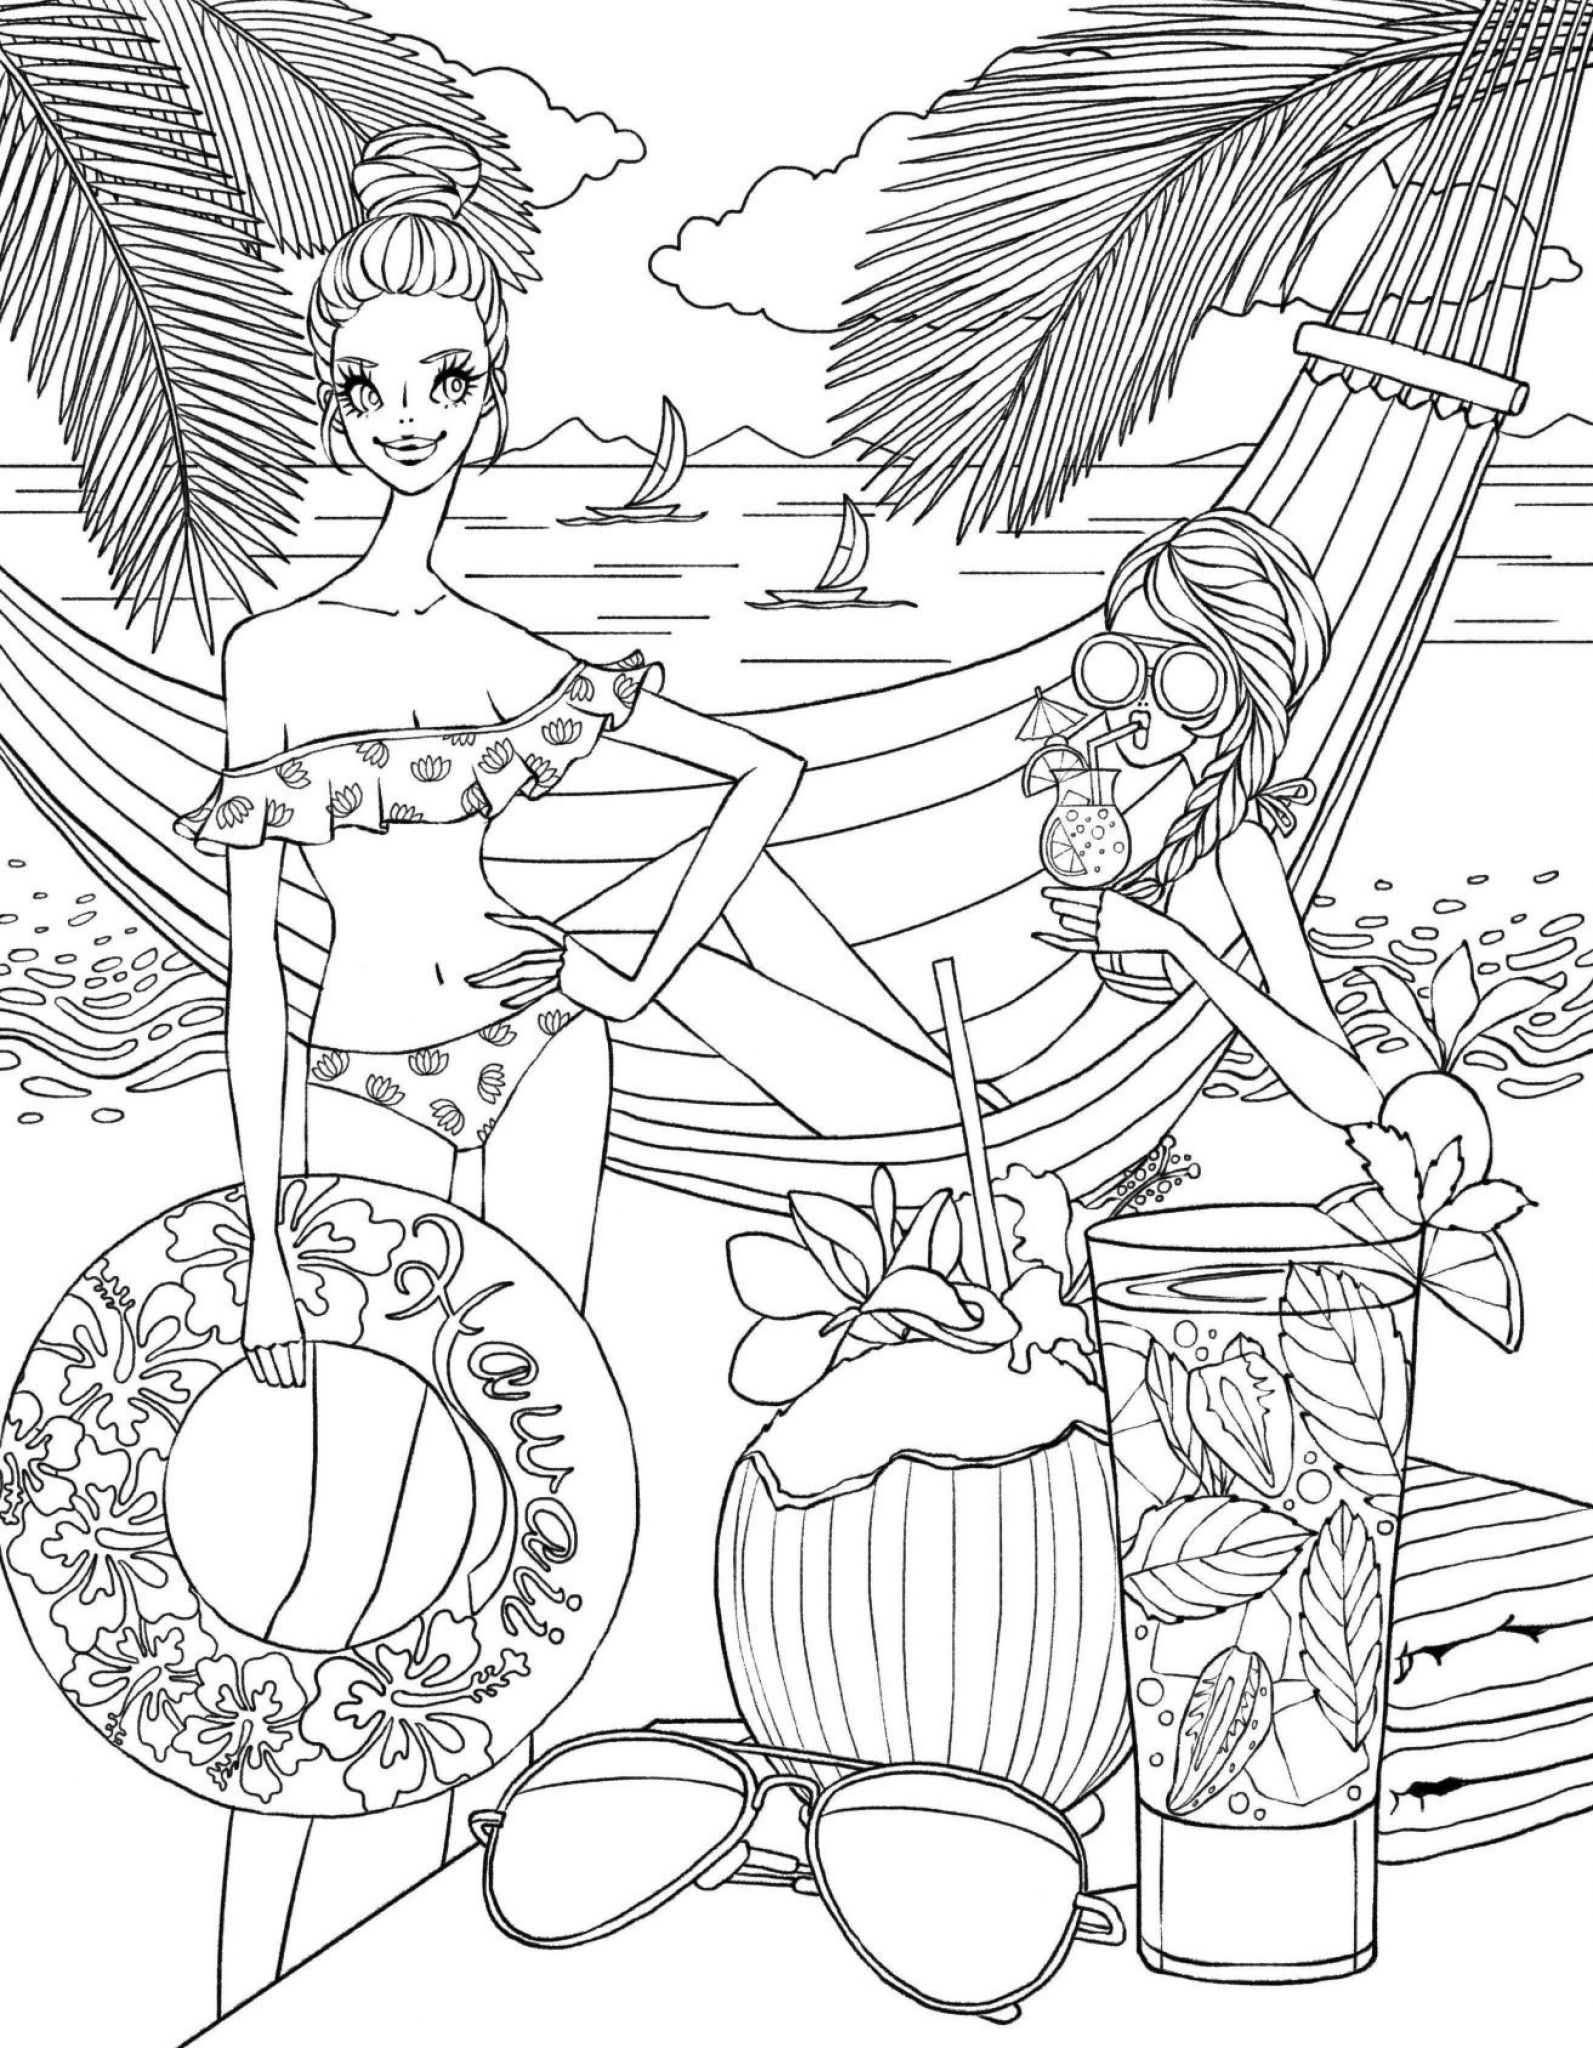 Coloring Worksheets for Preschool together with Recycling Coloring Pages Unique Seashell Template Unique Recycling